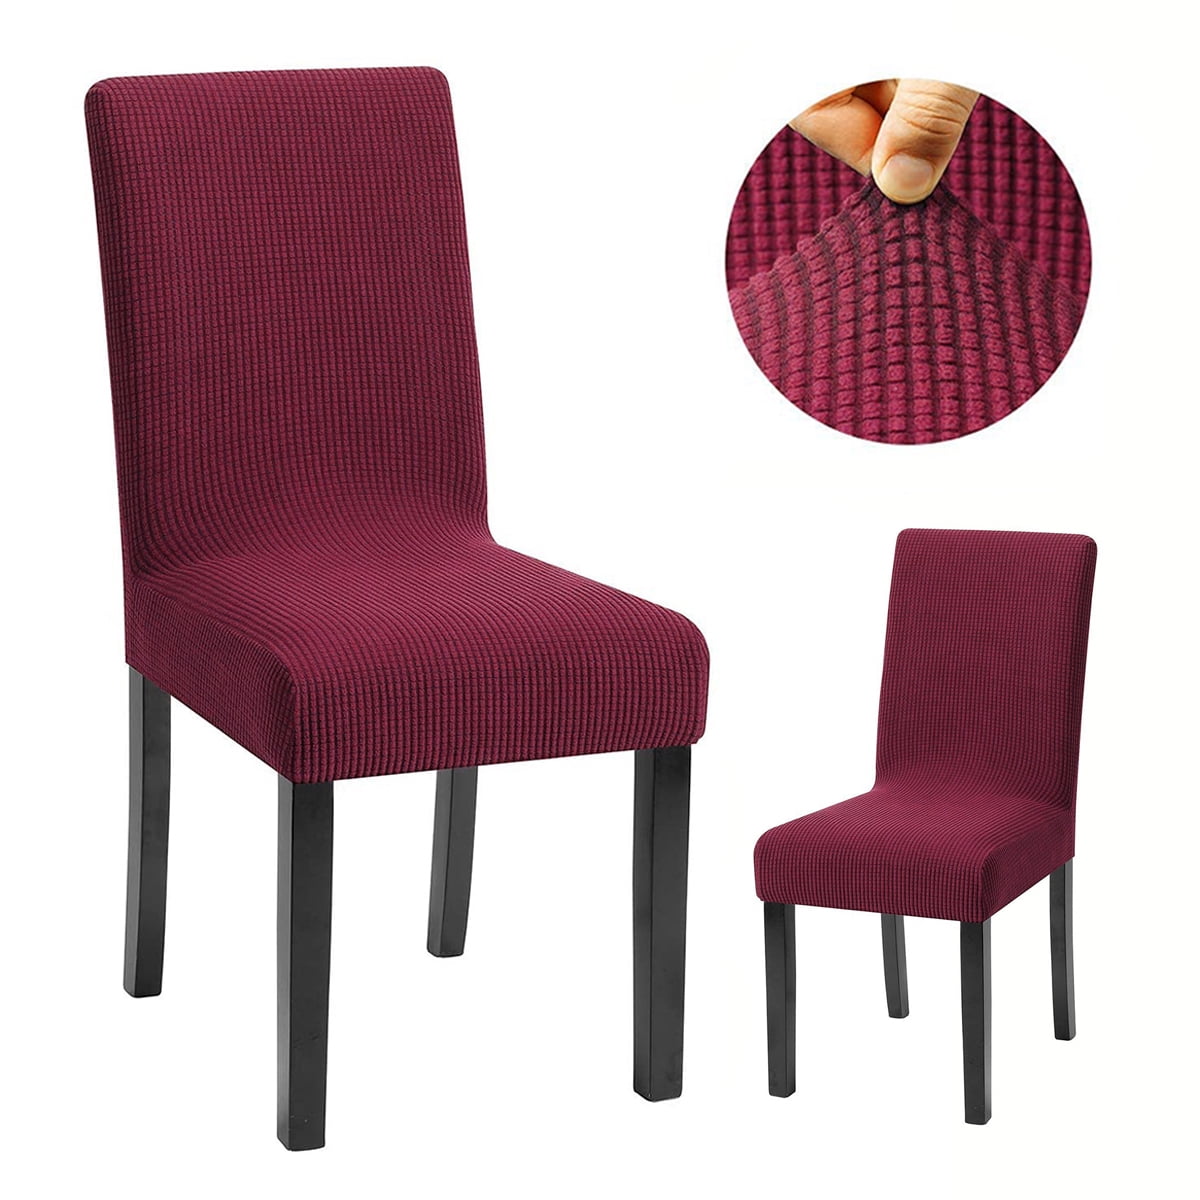 Details about   Removable Stretch Spandex Chair Cover Seat Slipcovers Dining Room Banquet Party 